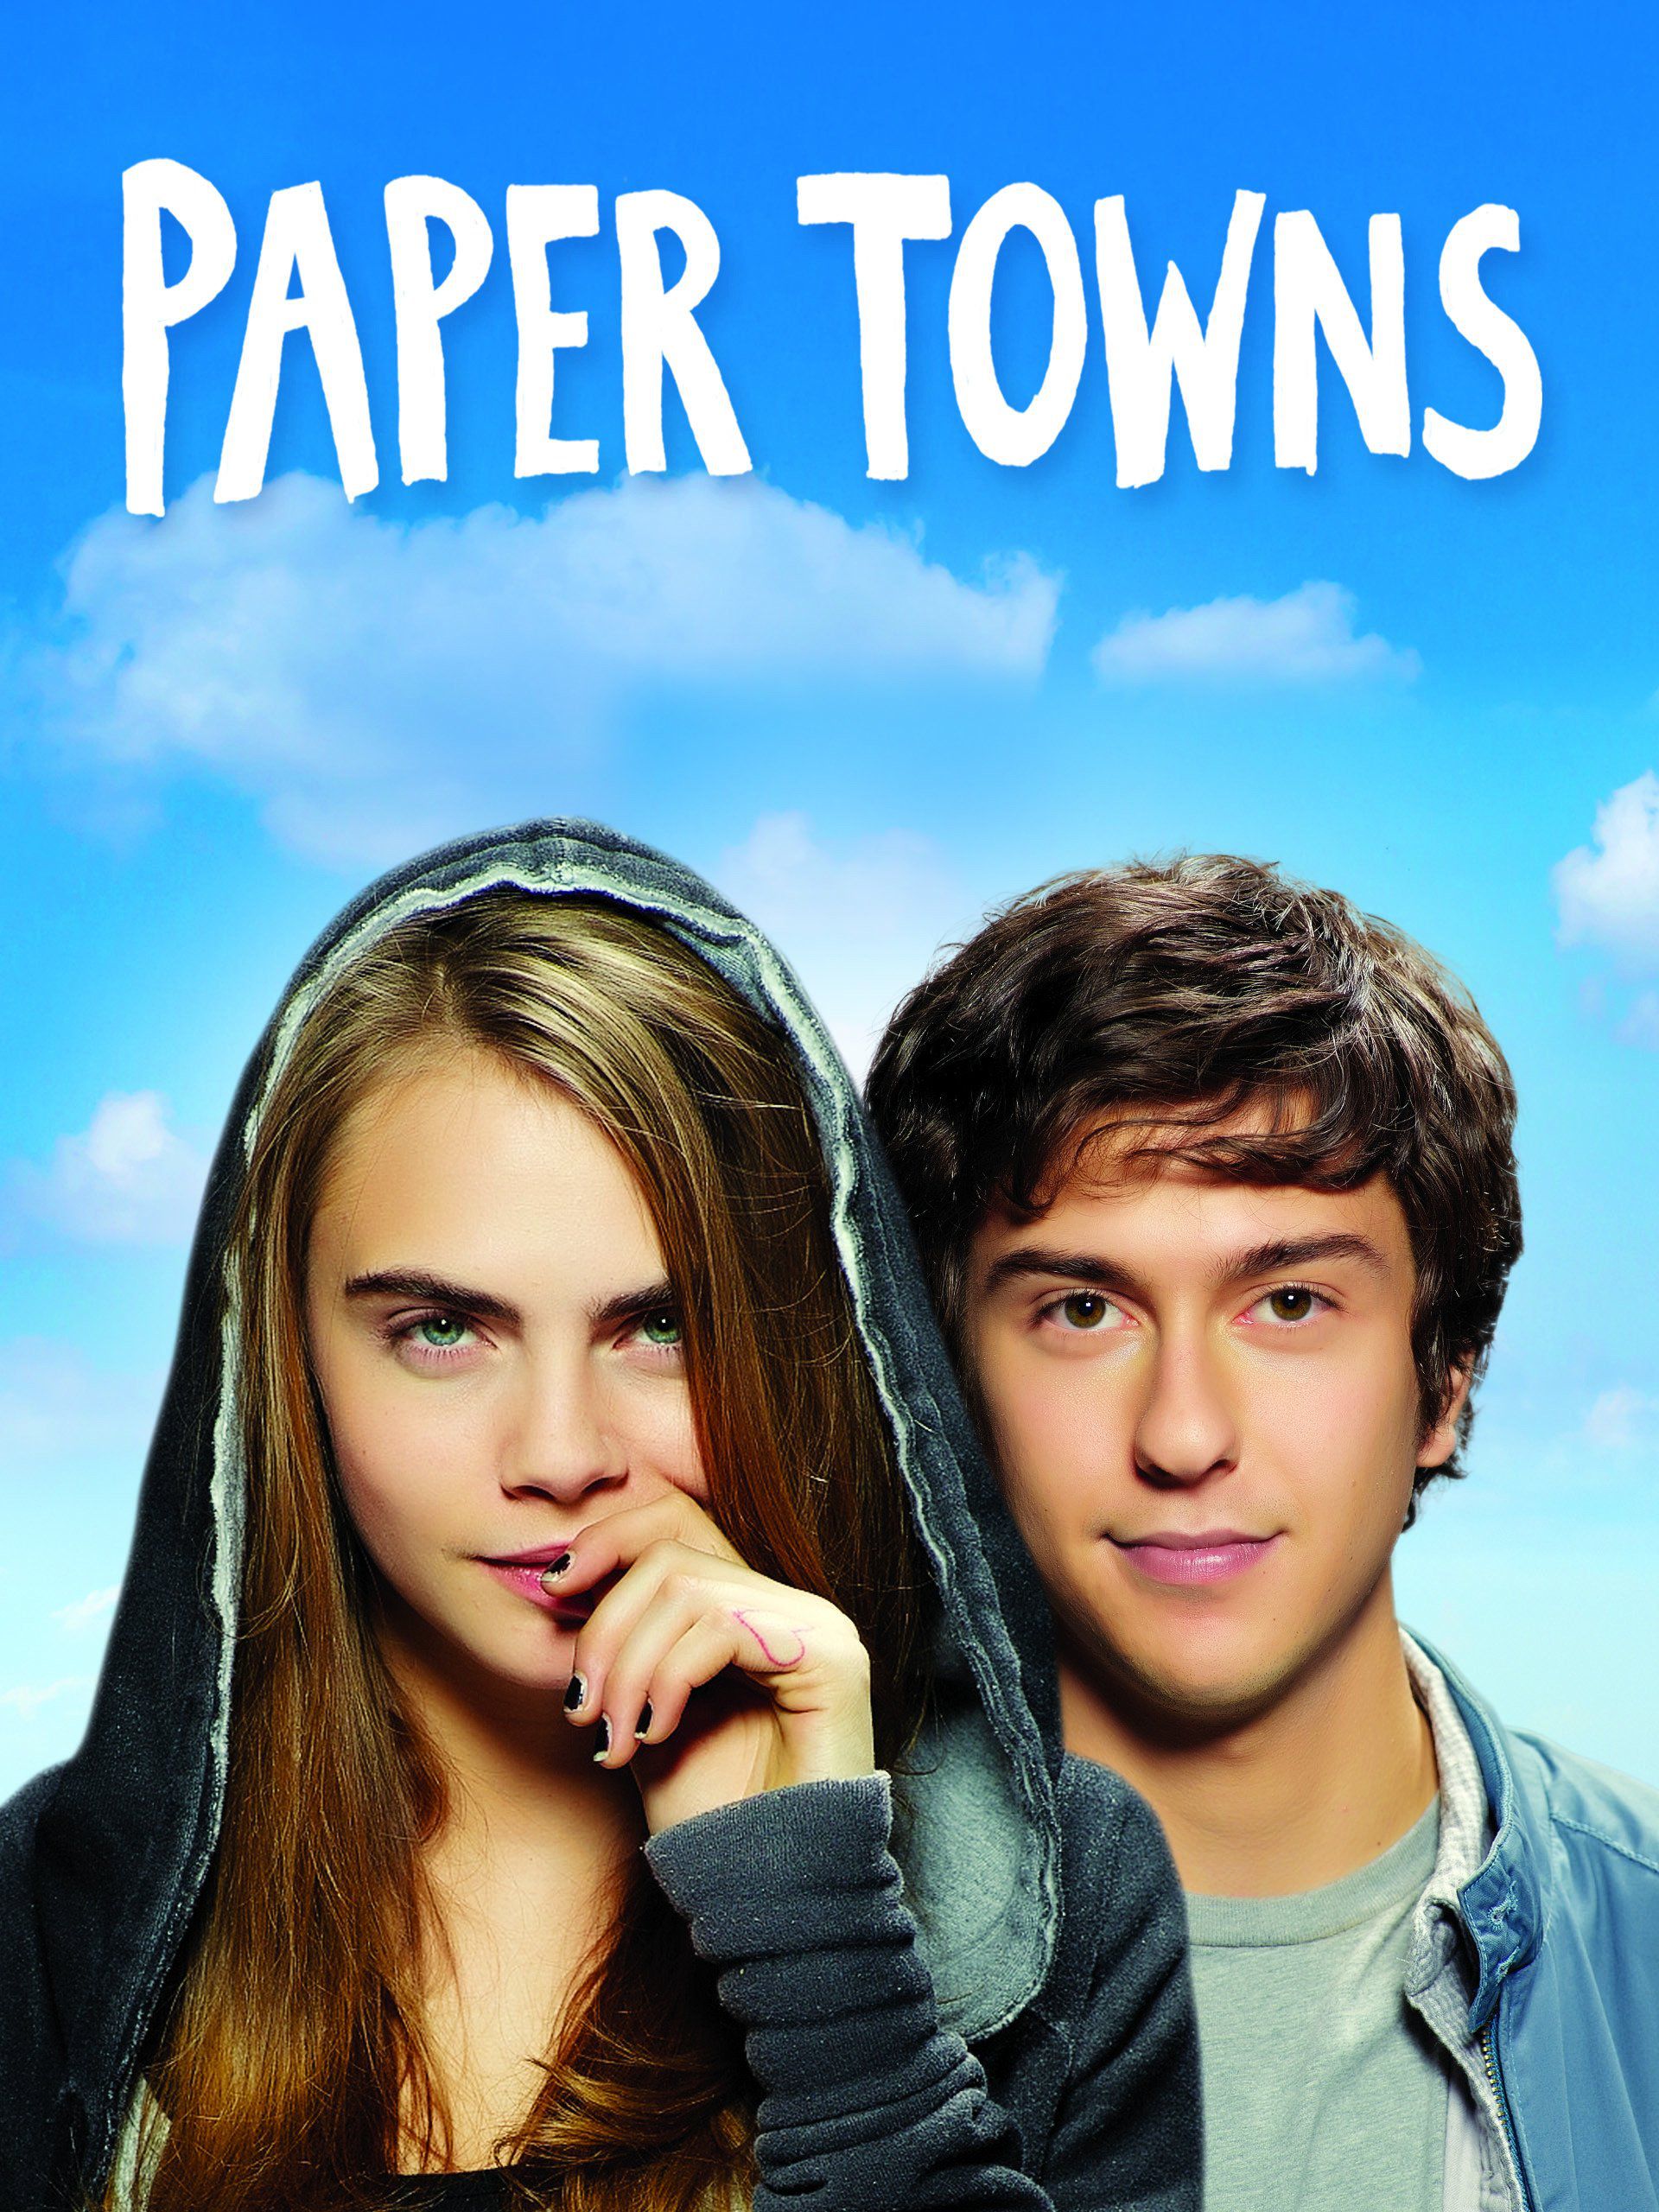 <p><b>Film Adaptation: “Paper Towns” (2015)</b></p><p><b>Critic Quote: </b>“Teenage angst has been a lucrative movie racket for years, but what happens when the kids are pretty much all right? Not a whole lot, at least in ‘Paper Towns,’ a serenely bland adaptation of the John Green young-adult novel about a regular boy in love with the mystery girl next door.” — The New York Times</p><p>After the success of the film adaptation of John Green’s “The Fault in Our Stars,” it made sense to try for another box office hit and turn “Paper Towns” into a movie. Unfortunately, the movie didn’t measure up and wasn’t able to effectively convey the charm of the novel.</p><p><b>Related:</b> <a href="https://blog.cheapism.com/bestselling-book-your-state/">The Bestselling Book That's Set in Your State</a></p>